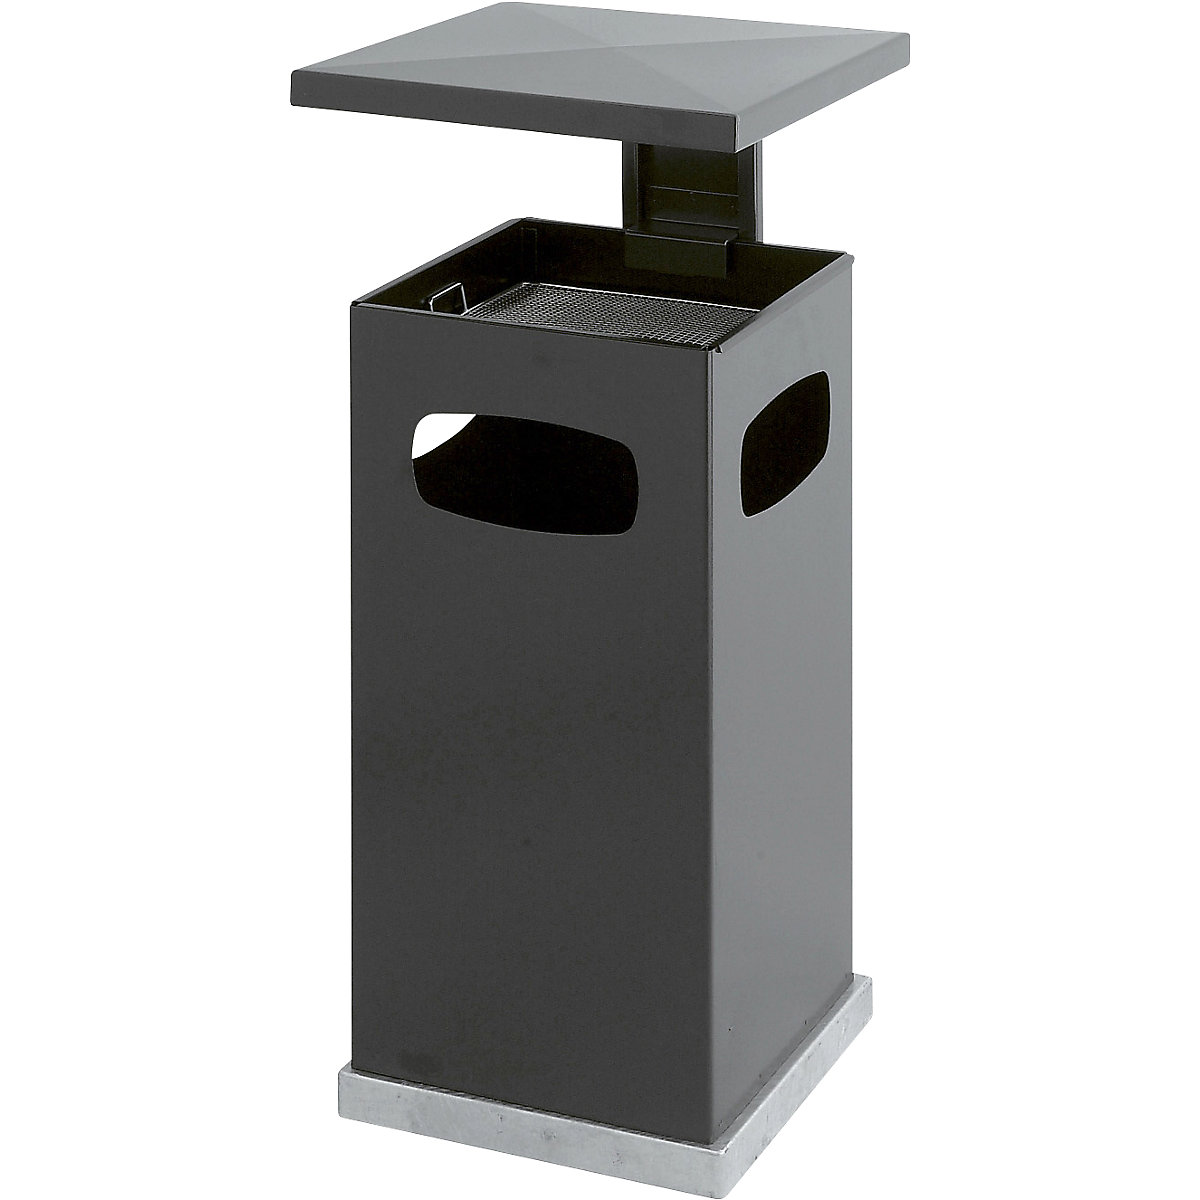 Waste collector with ashtray insert and protective cover, capacity 38 l, WxHxD 395 x 910 x 395 mm, black grey